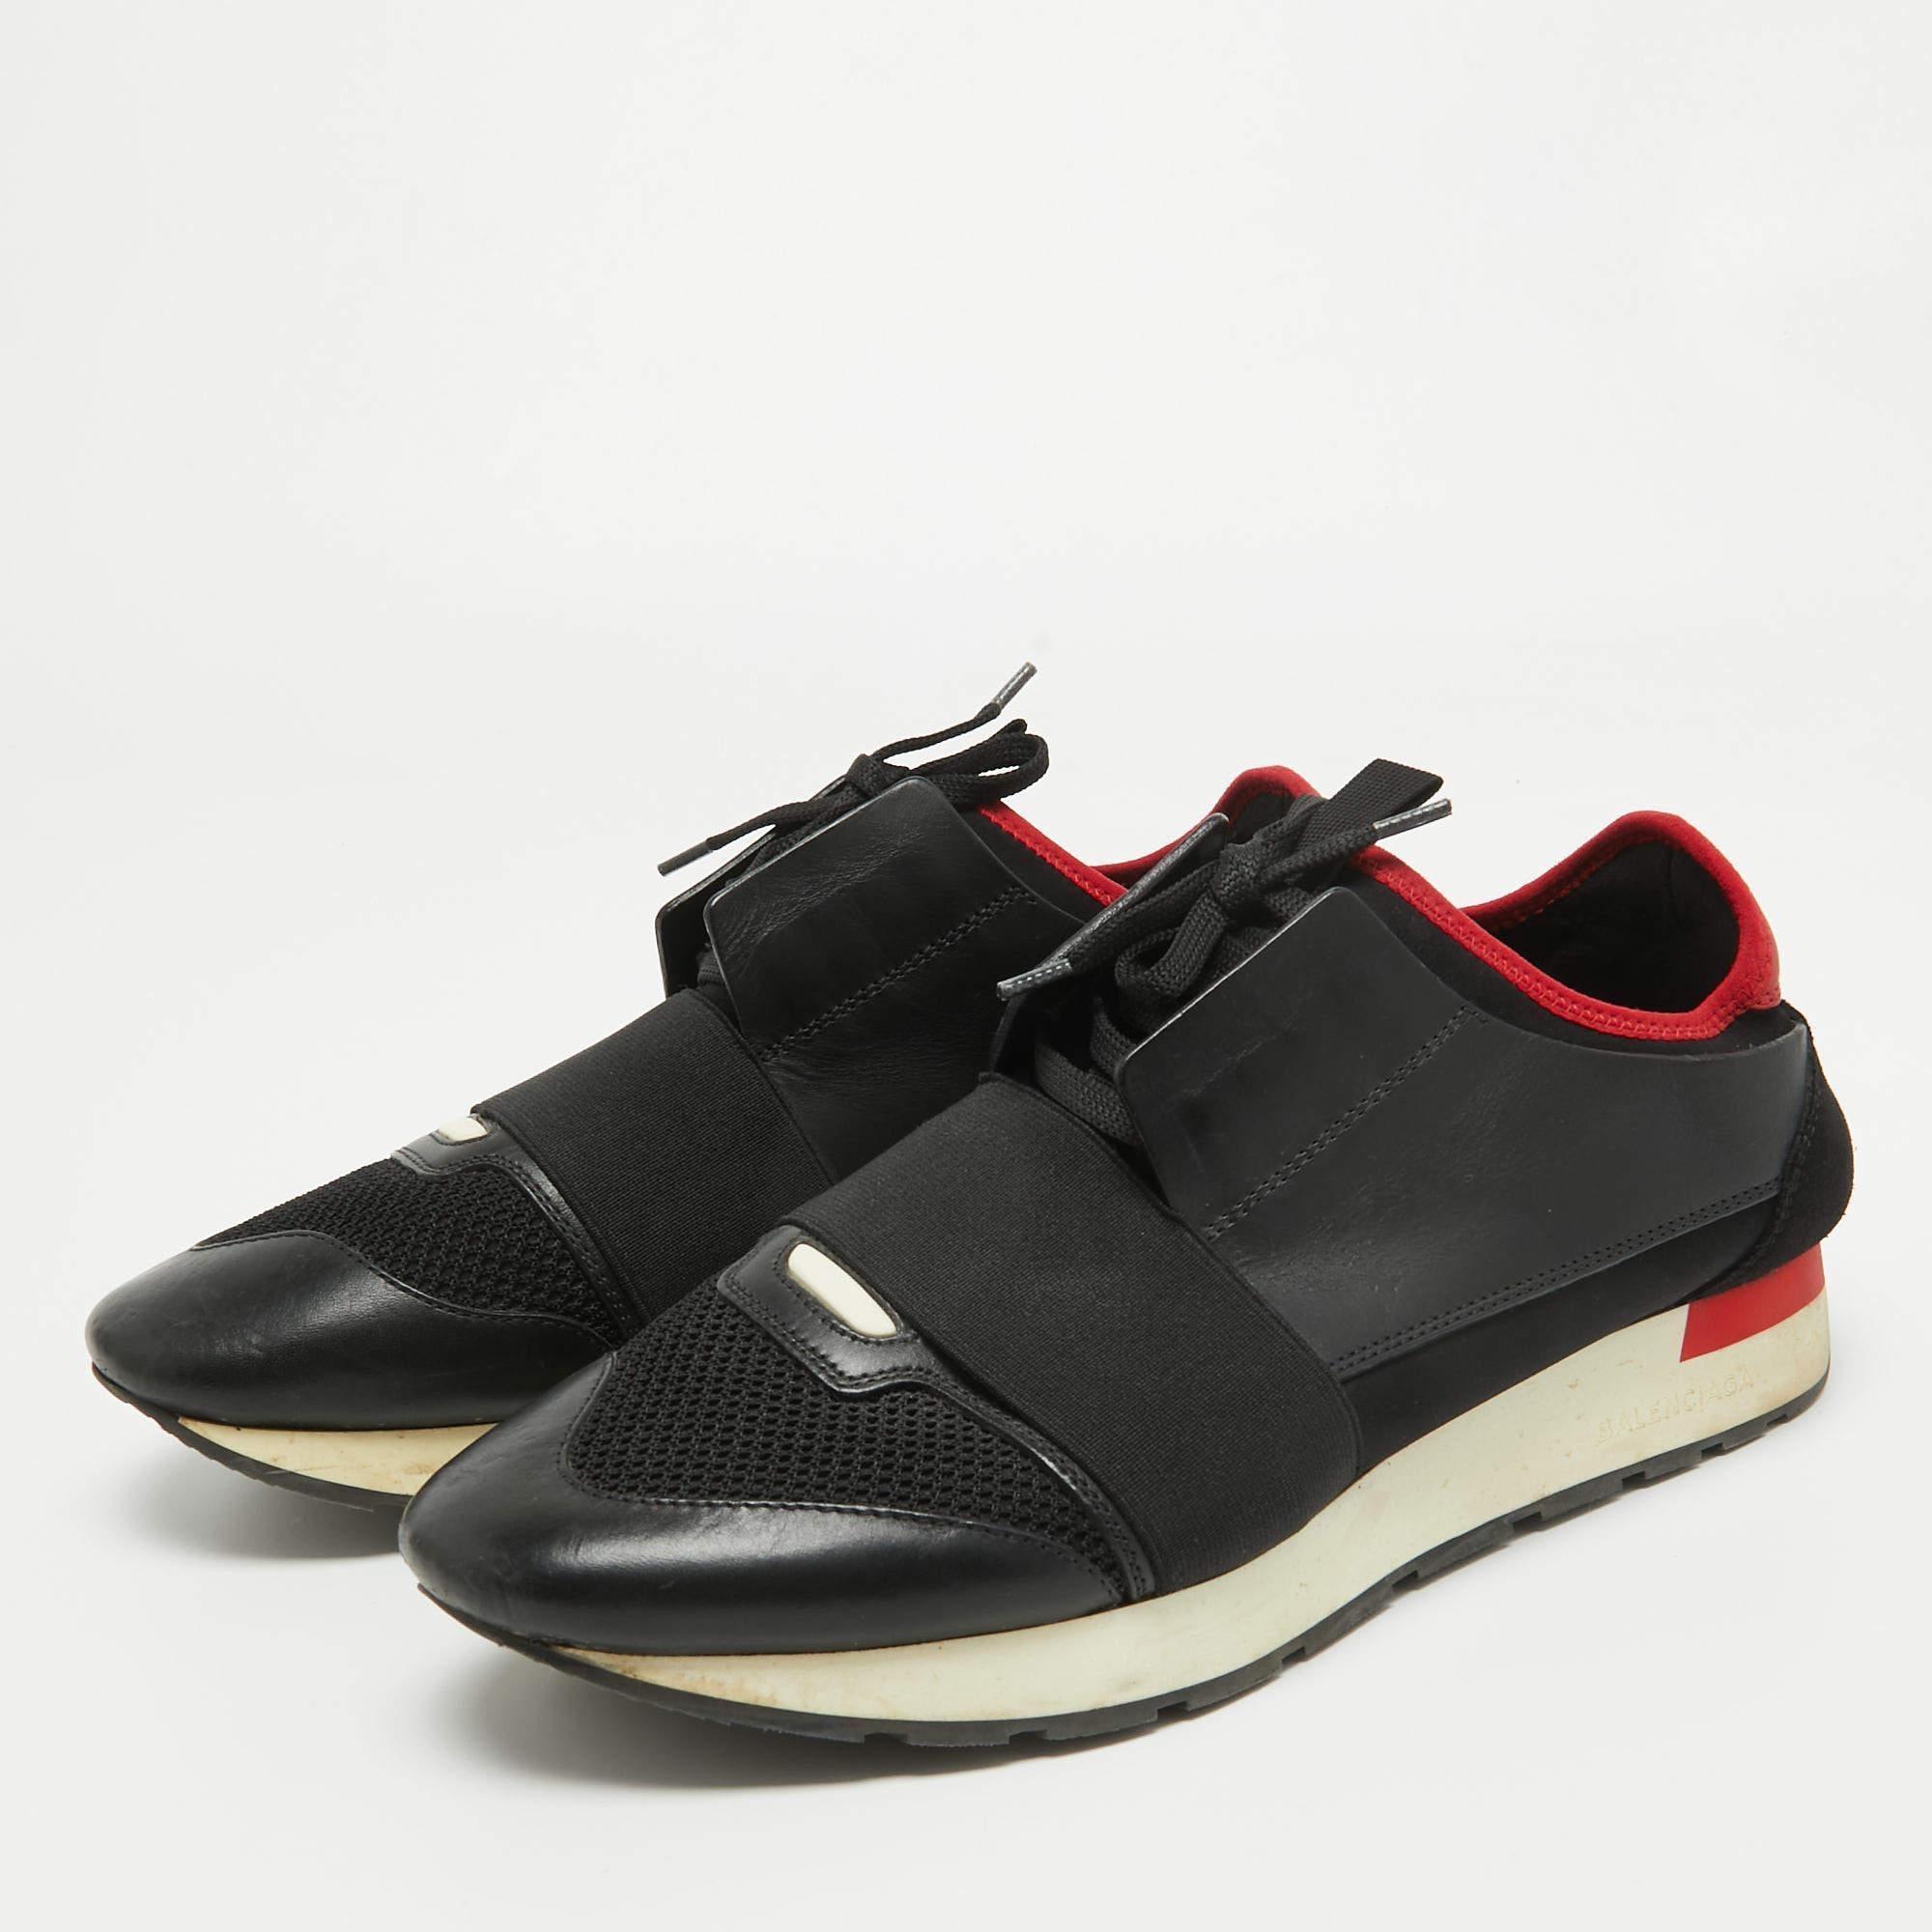 Balenciaga Black/Red Leather and Mesh Race Runner Sneakers Size 42 In Good Condition For Sale In Dubai, Al Qouz 2